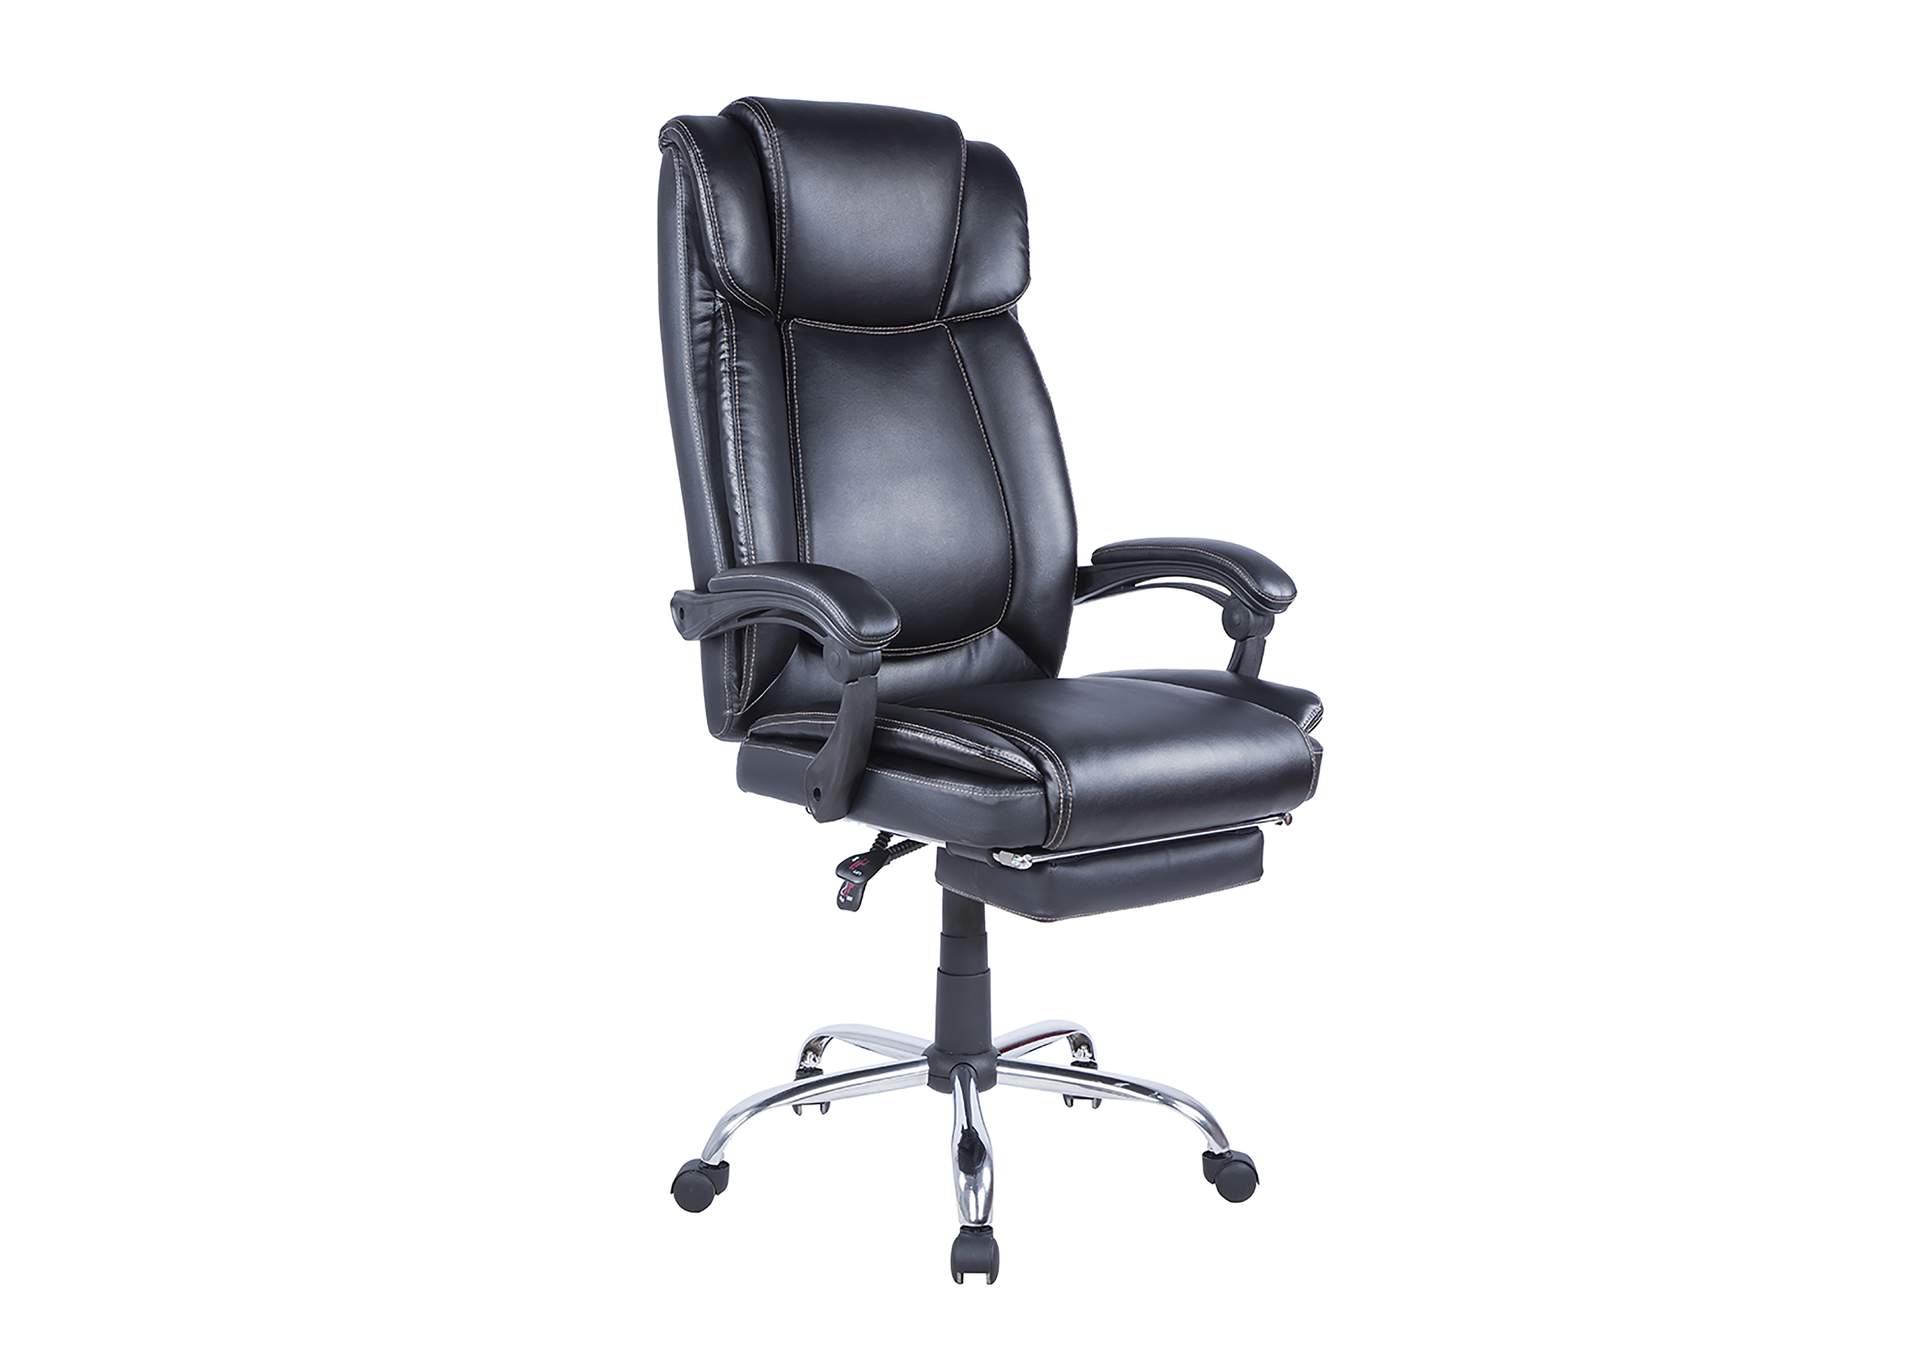 Modern Ergonomic Computer Chair,Chintaly Imports